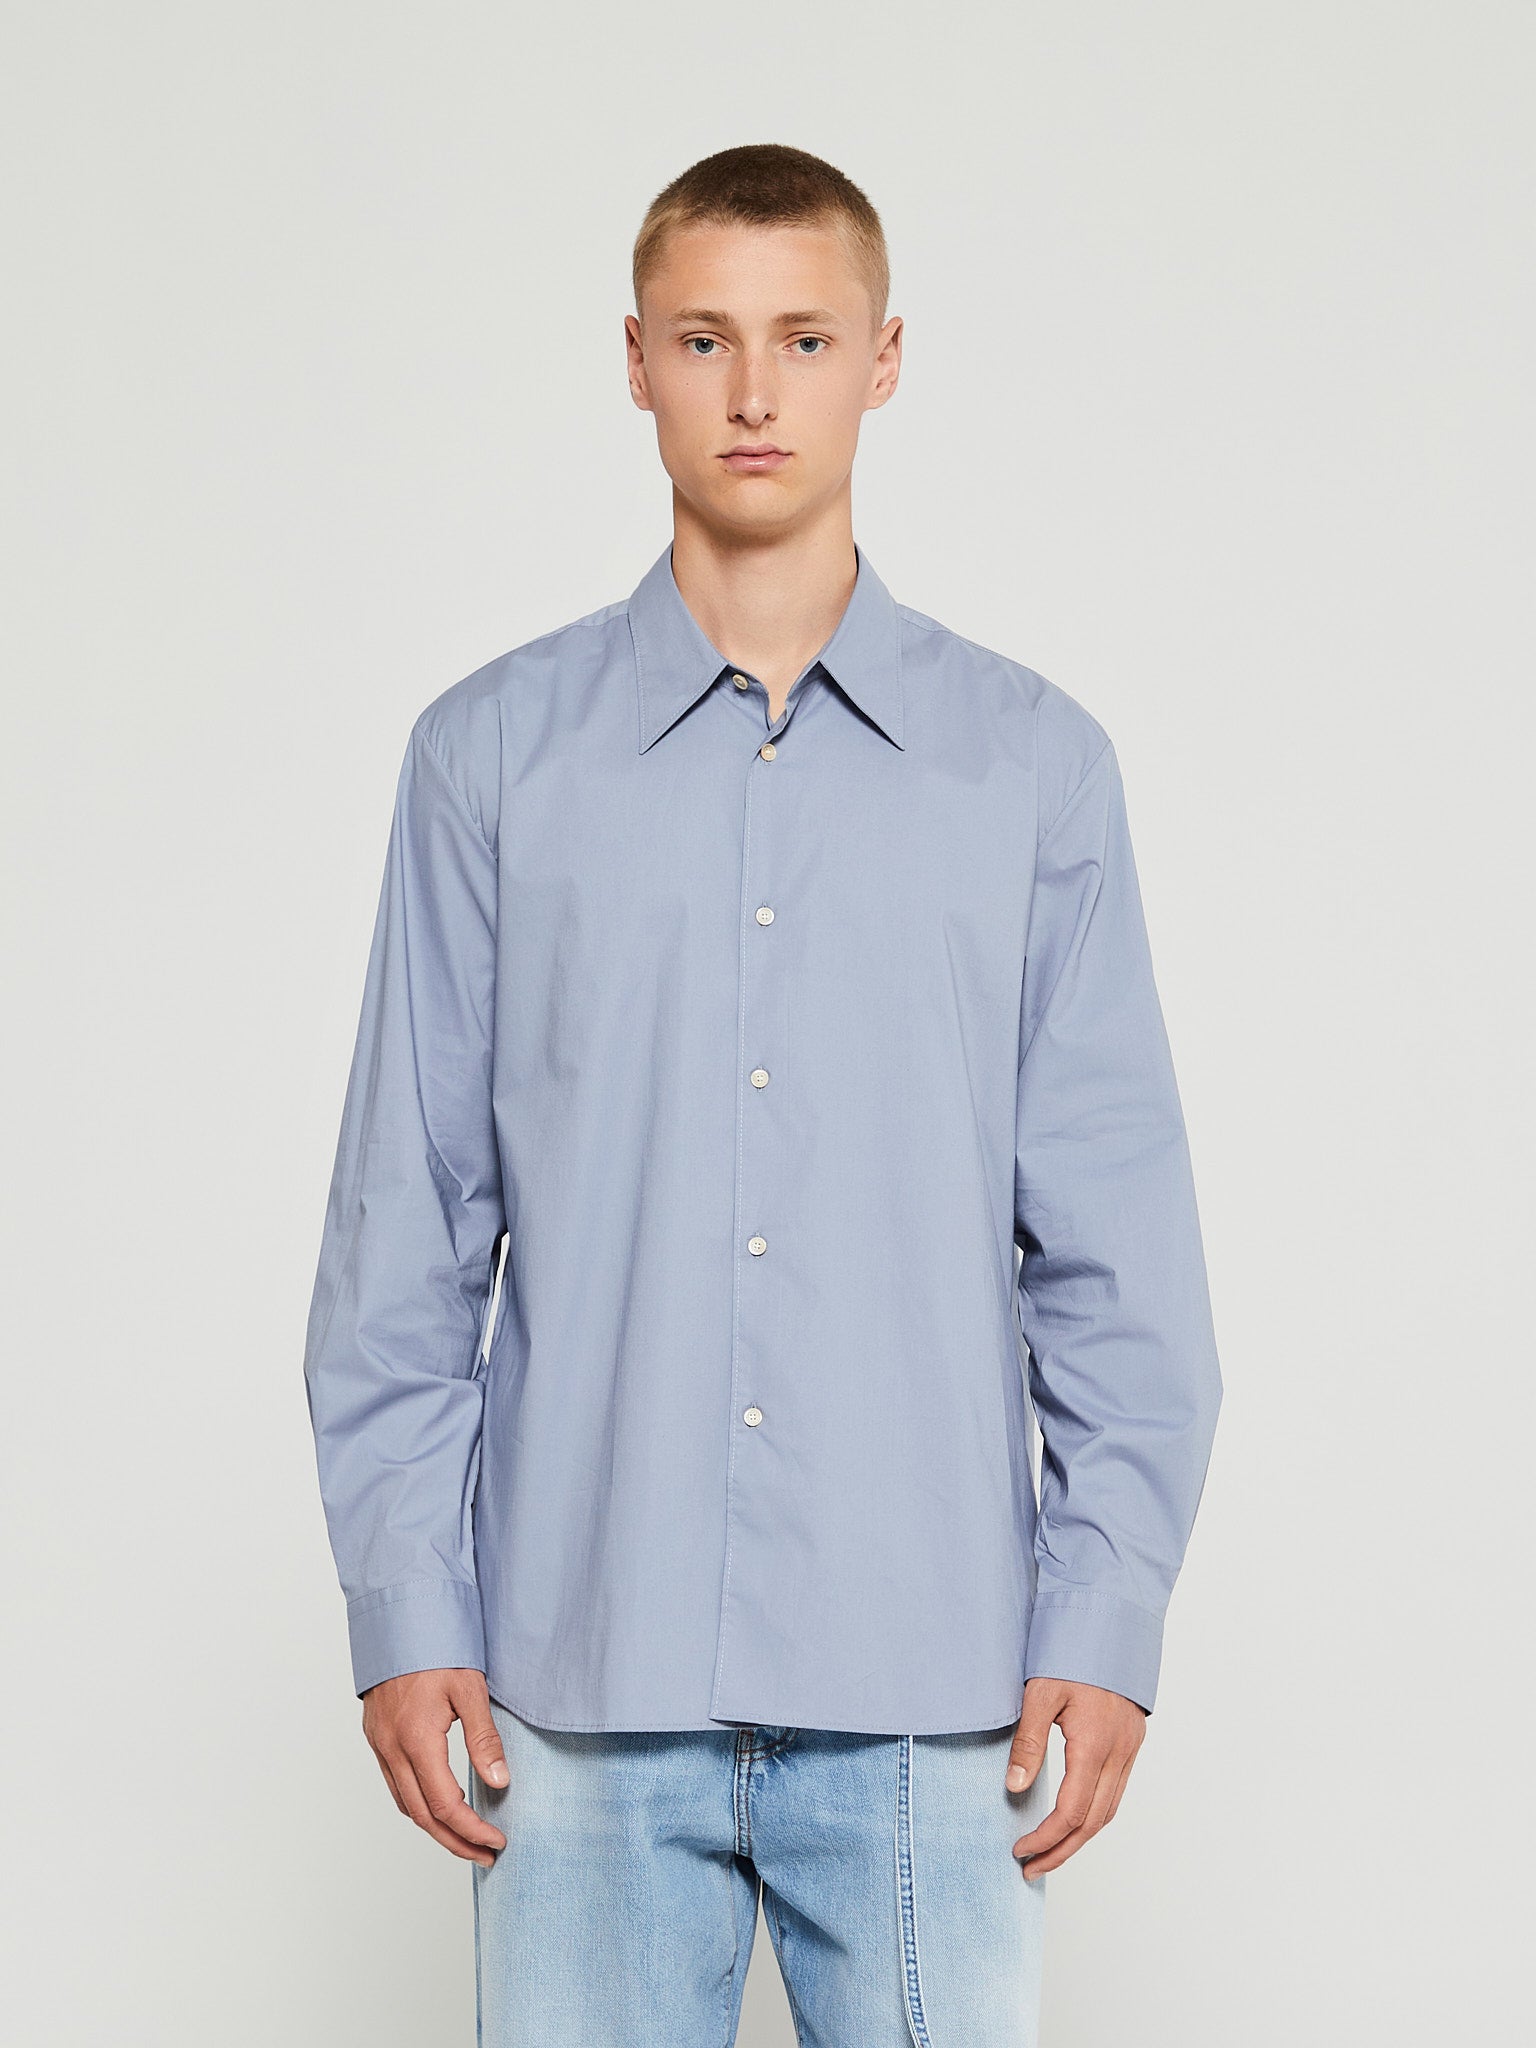 Acne Studios - Button-up Shirt in Dusty Blue